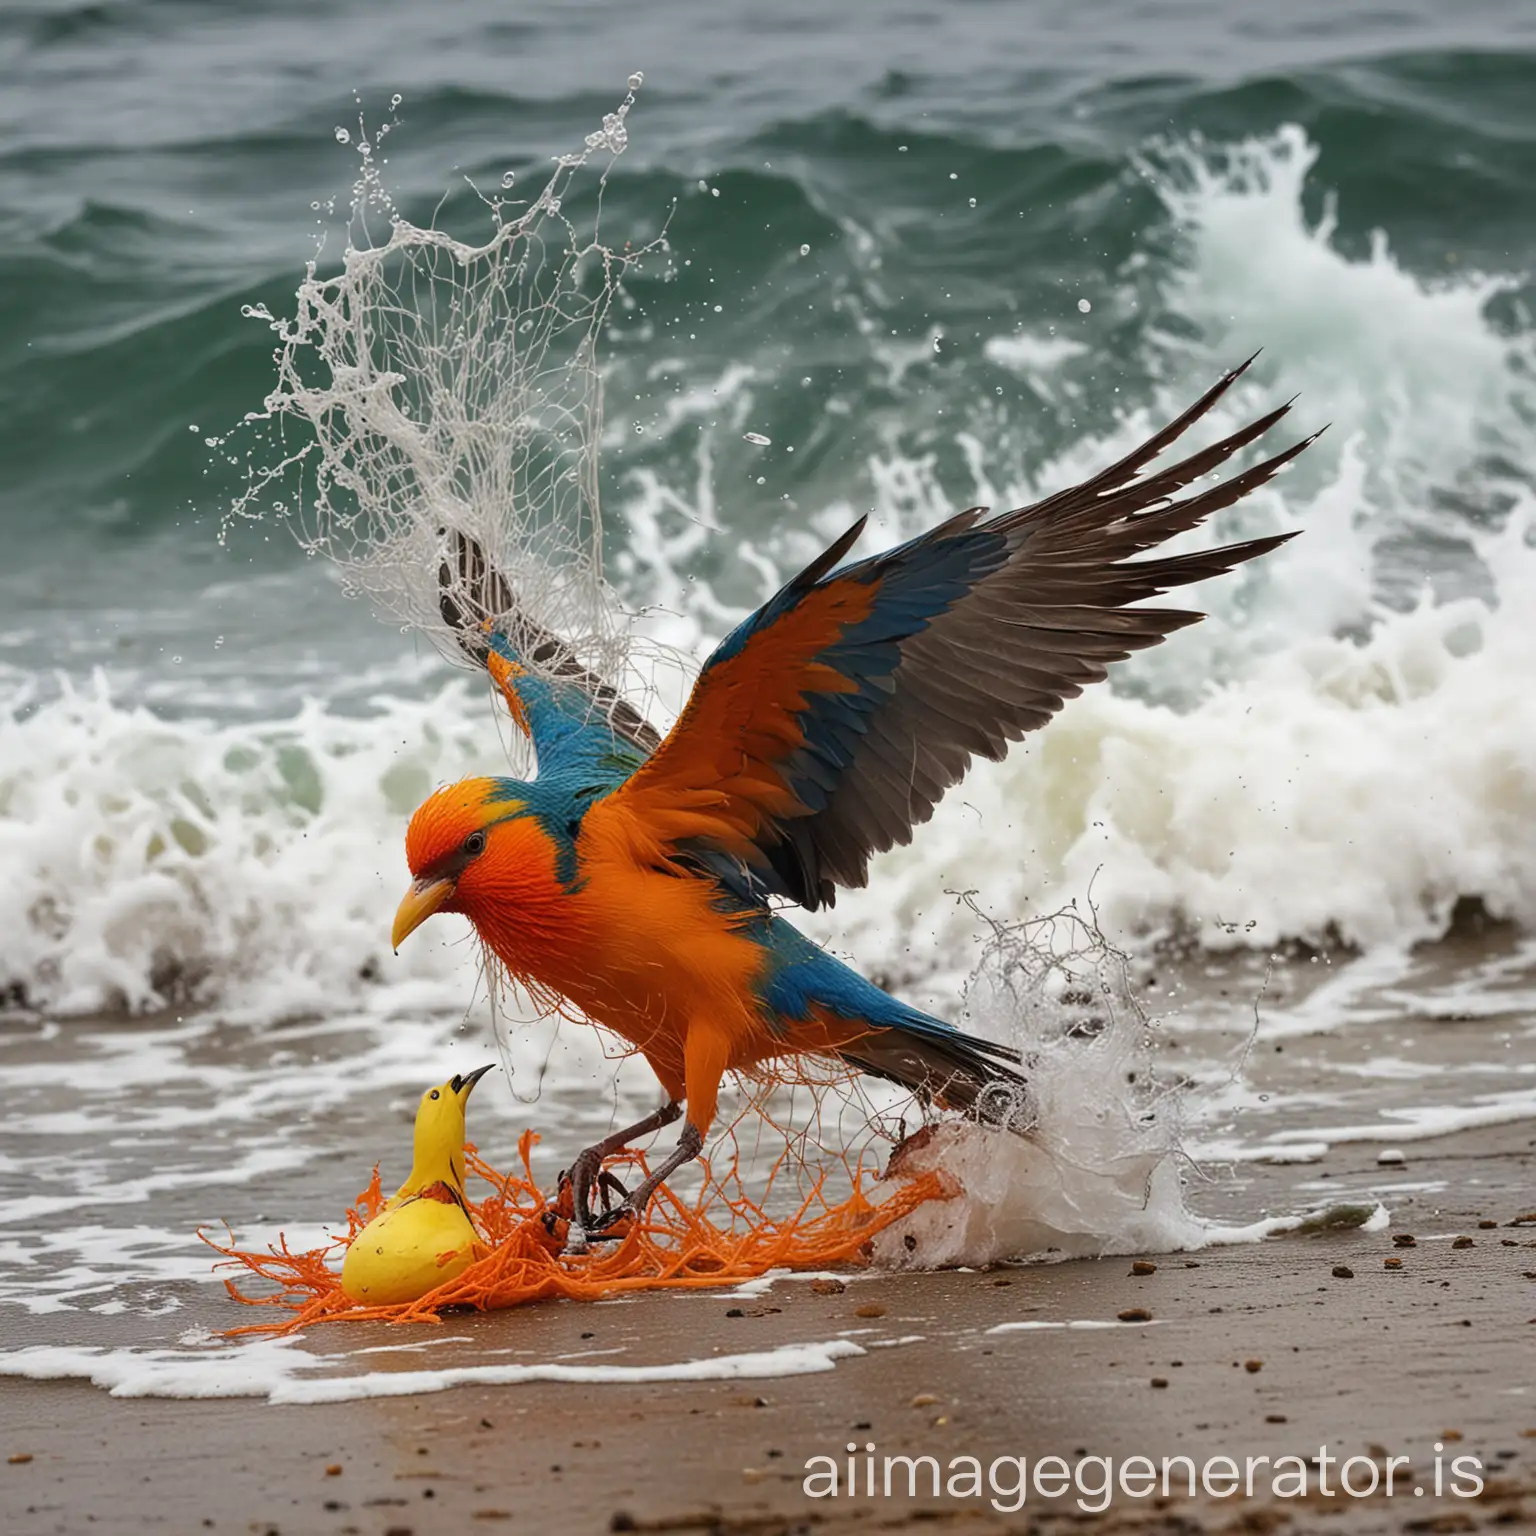 Struggle-of-a-Colorful-Bird-Caught-in-a-Fishing-Net